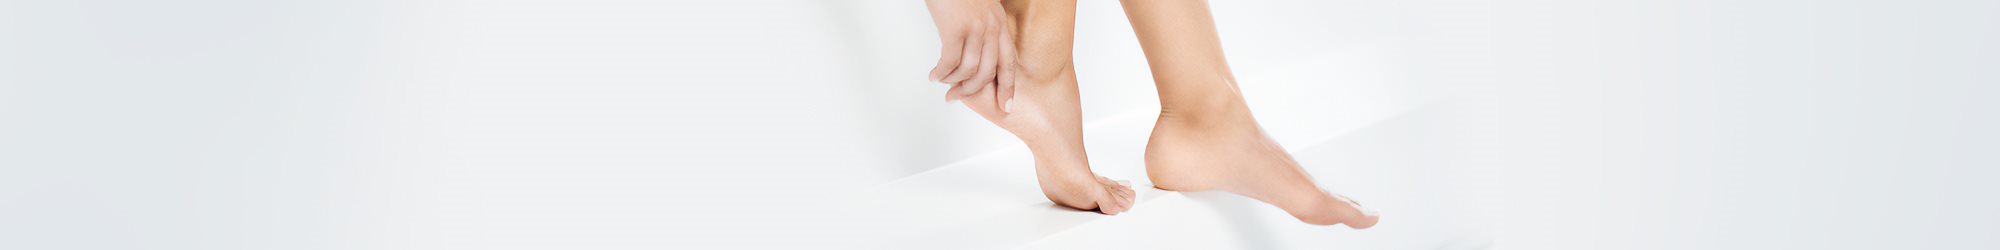 A closeup view of a model touching the heel of their right foot with both feet in view against a white background.